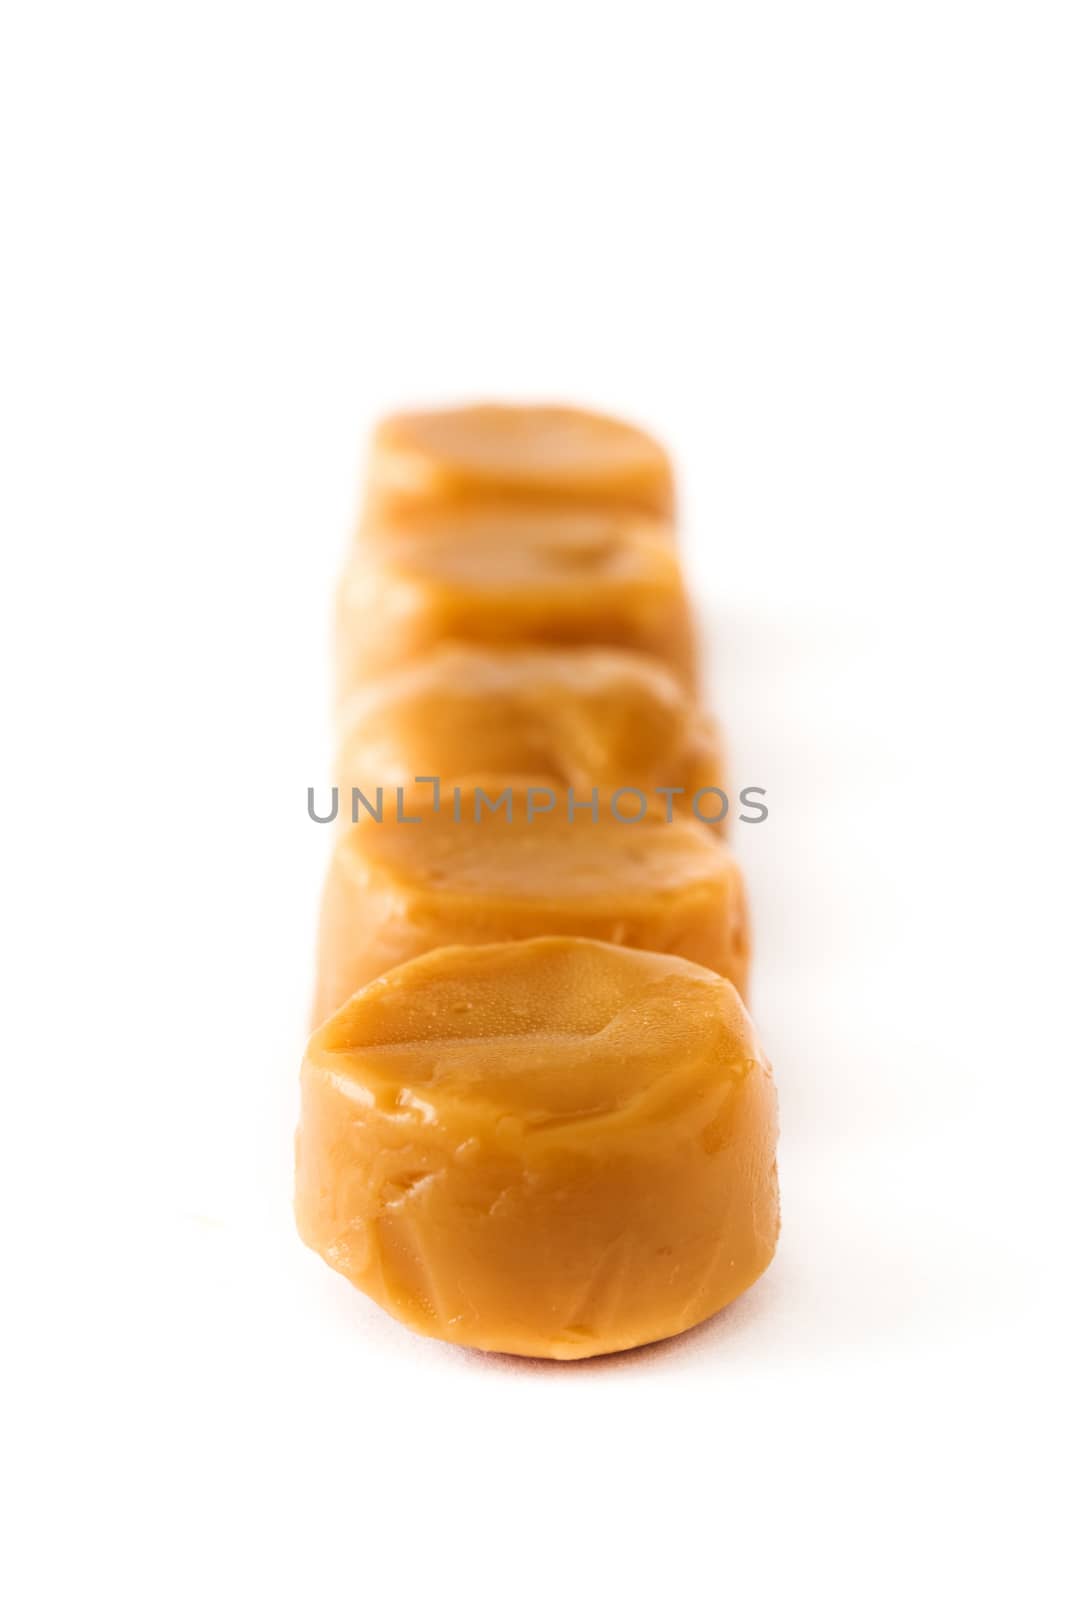 Toffee caramel candies isolated on white background. Copyspace. by chandlervid85